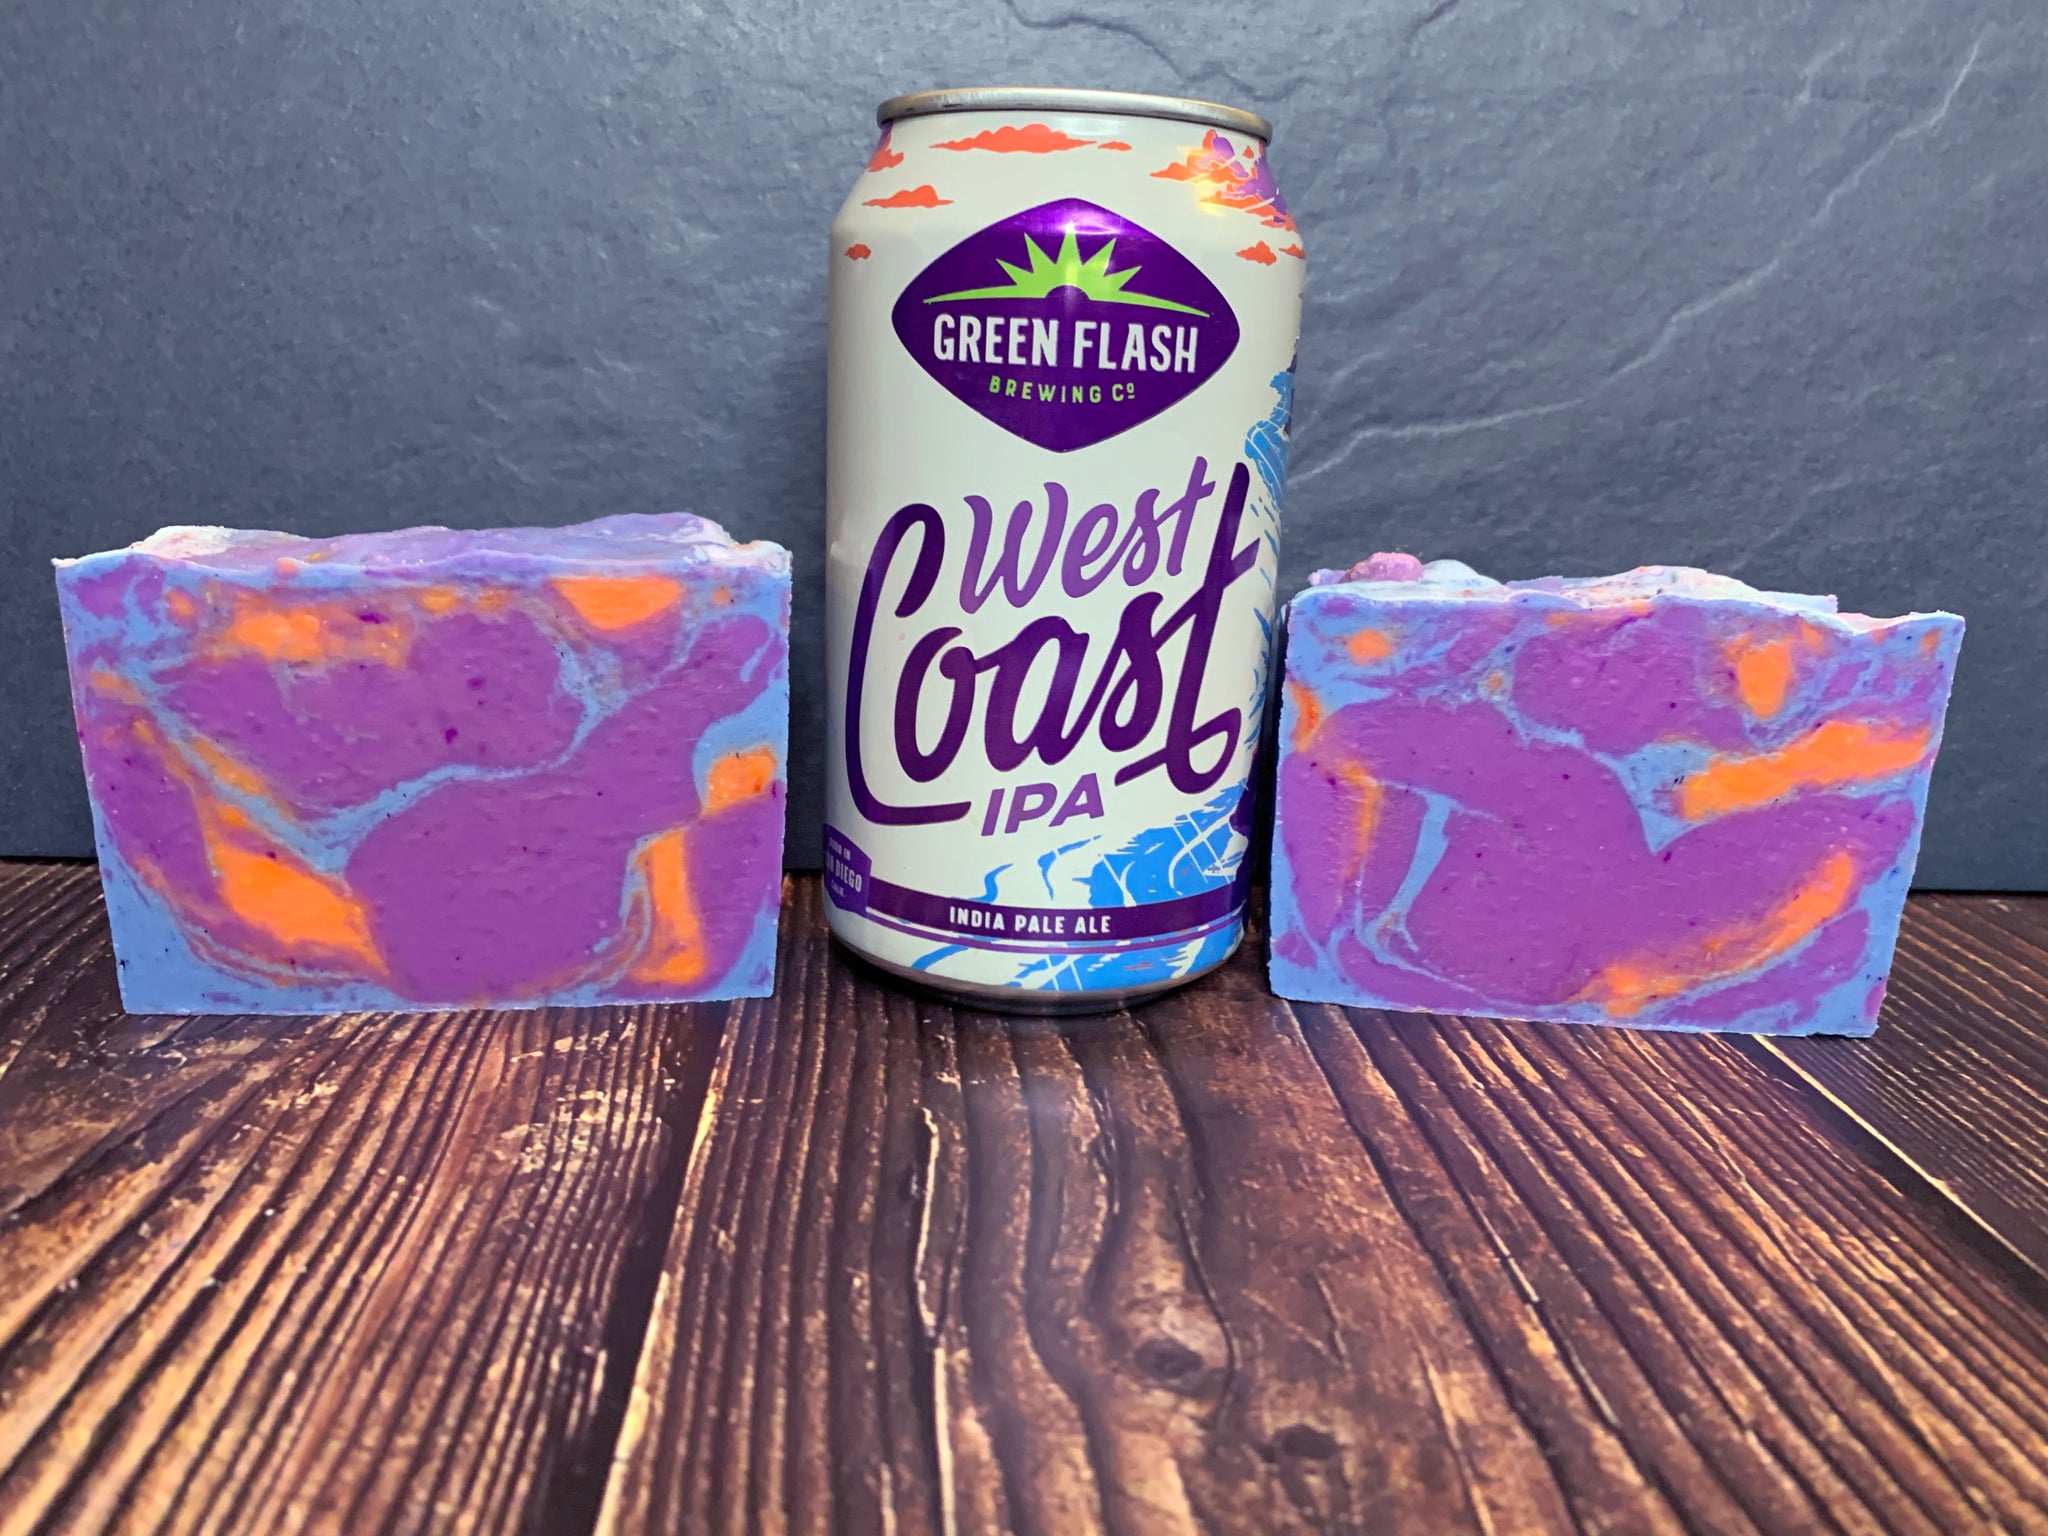 craft beer soap handmade in texas with west coast ipa India pale ale beer from green flash brewing co San Diego California craft brewery purple orange and blue soap floral craft beer soap for her